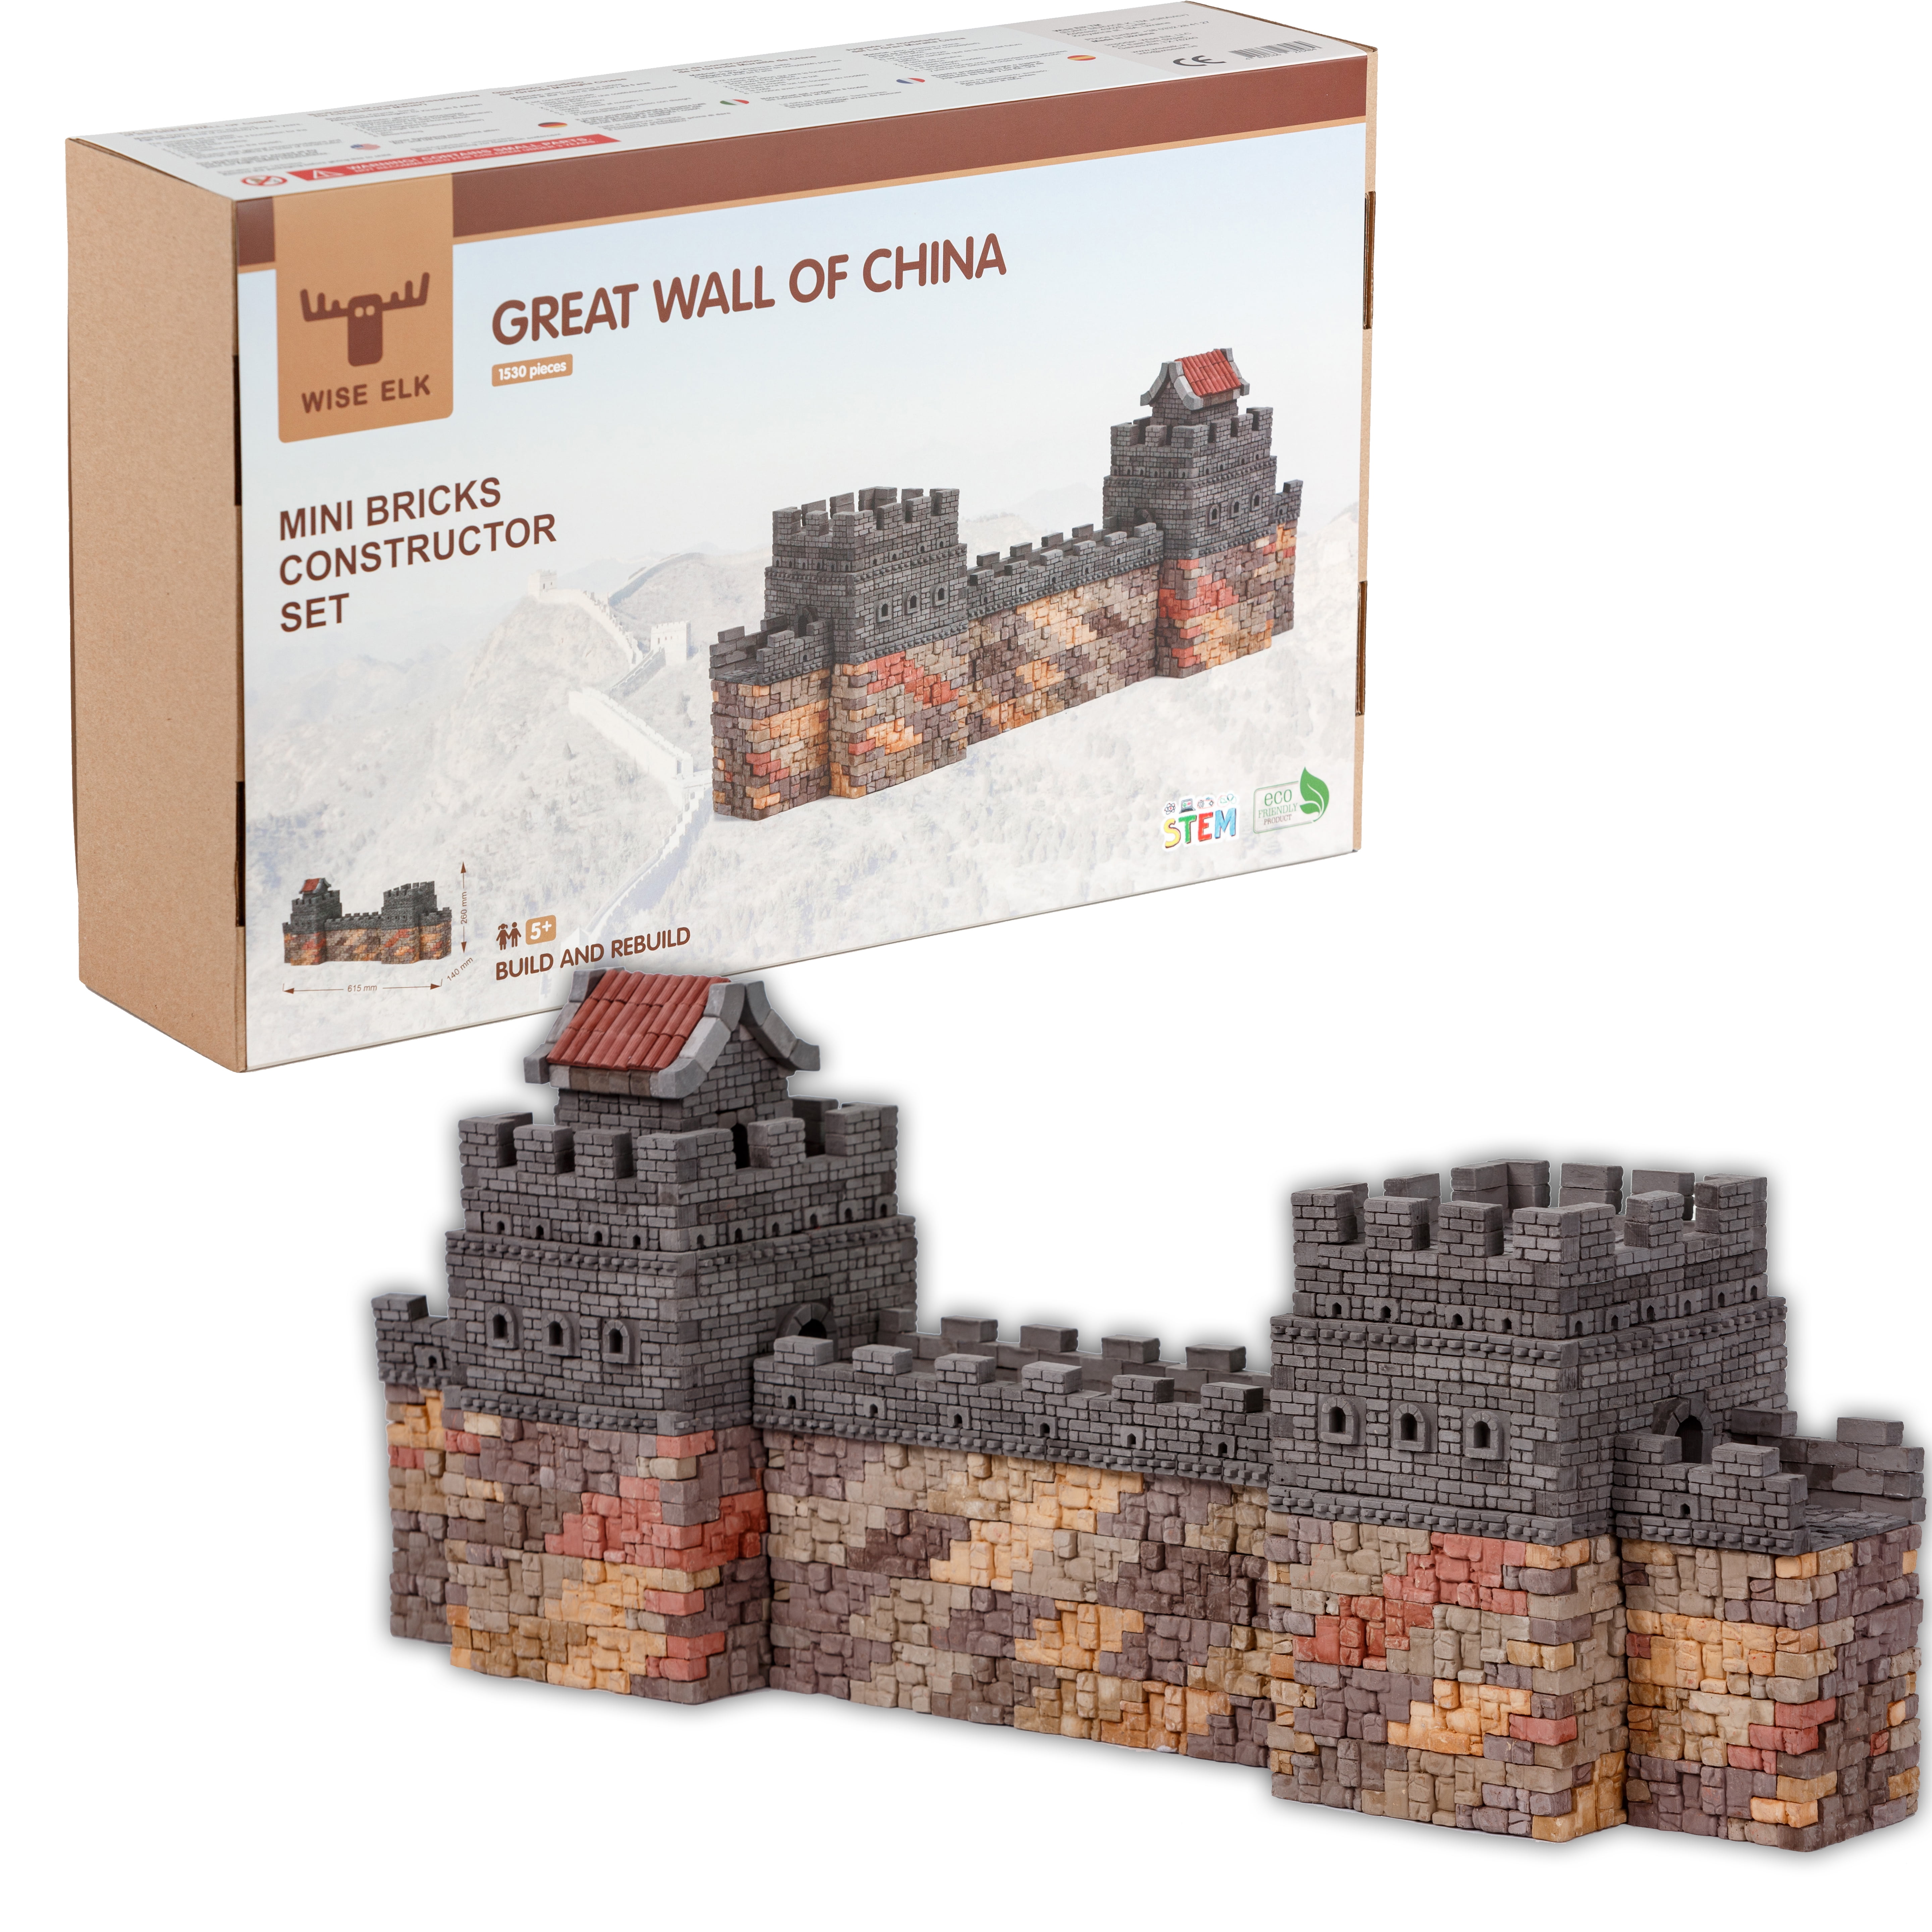 Great Wall of China Wise Elk Ceramic/Plaster Building Blick Kit 